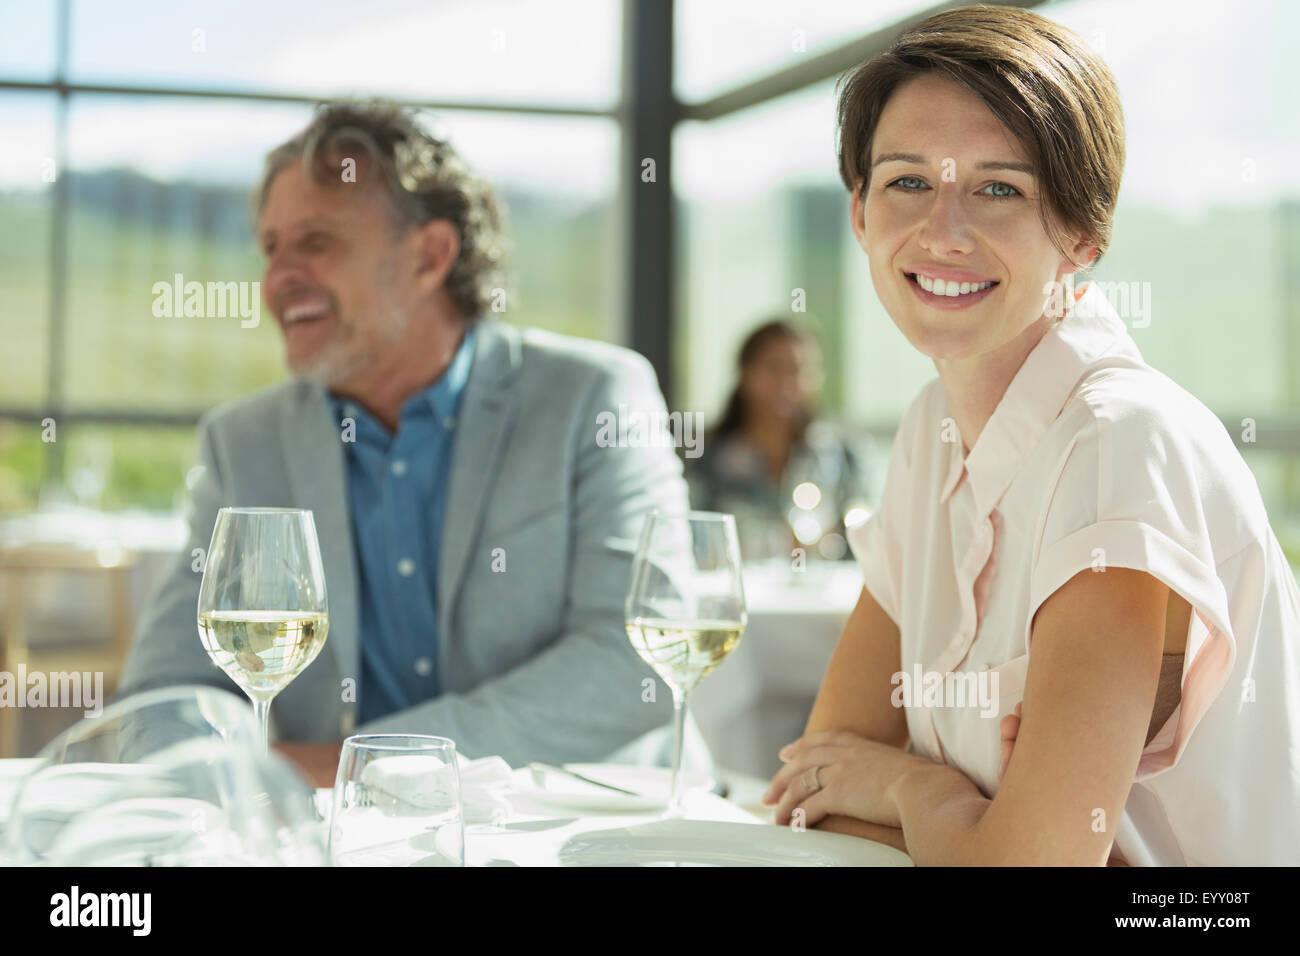 Portrait smiling woman drinking wine in sunny restaurant Stock Photo